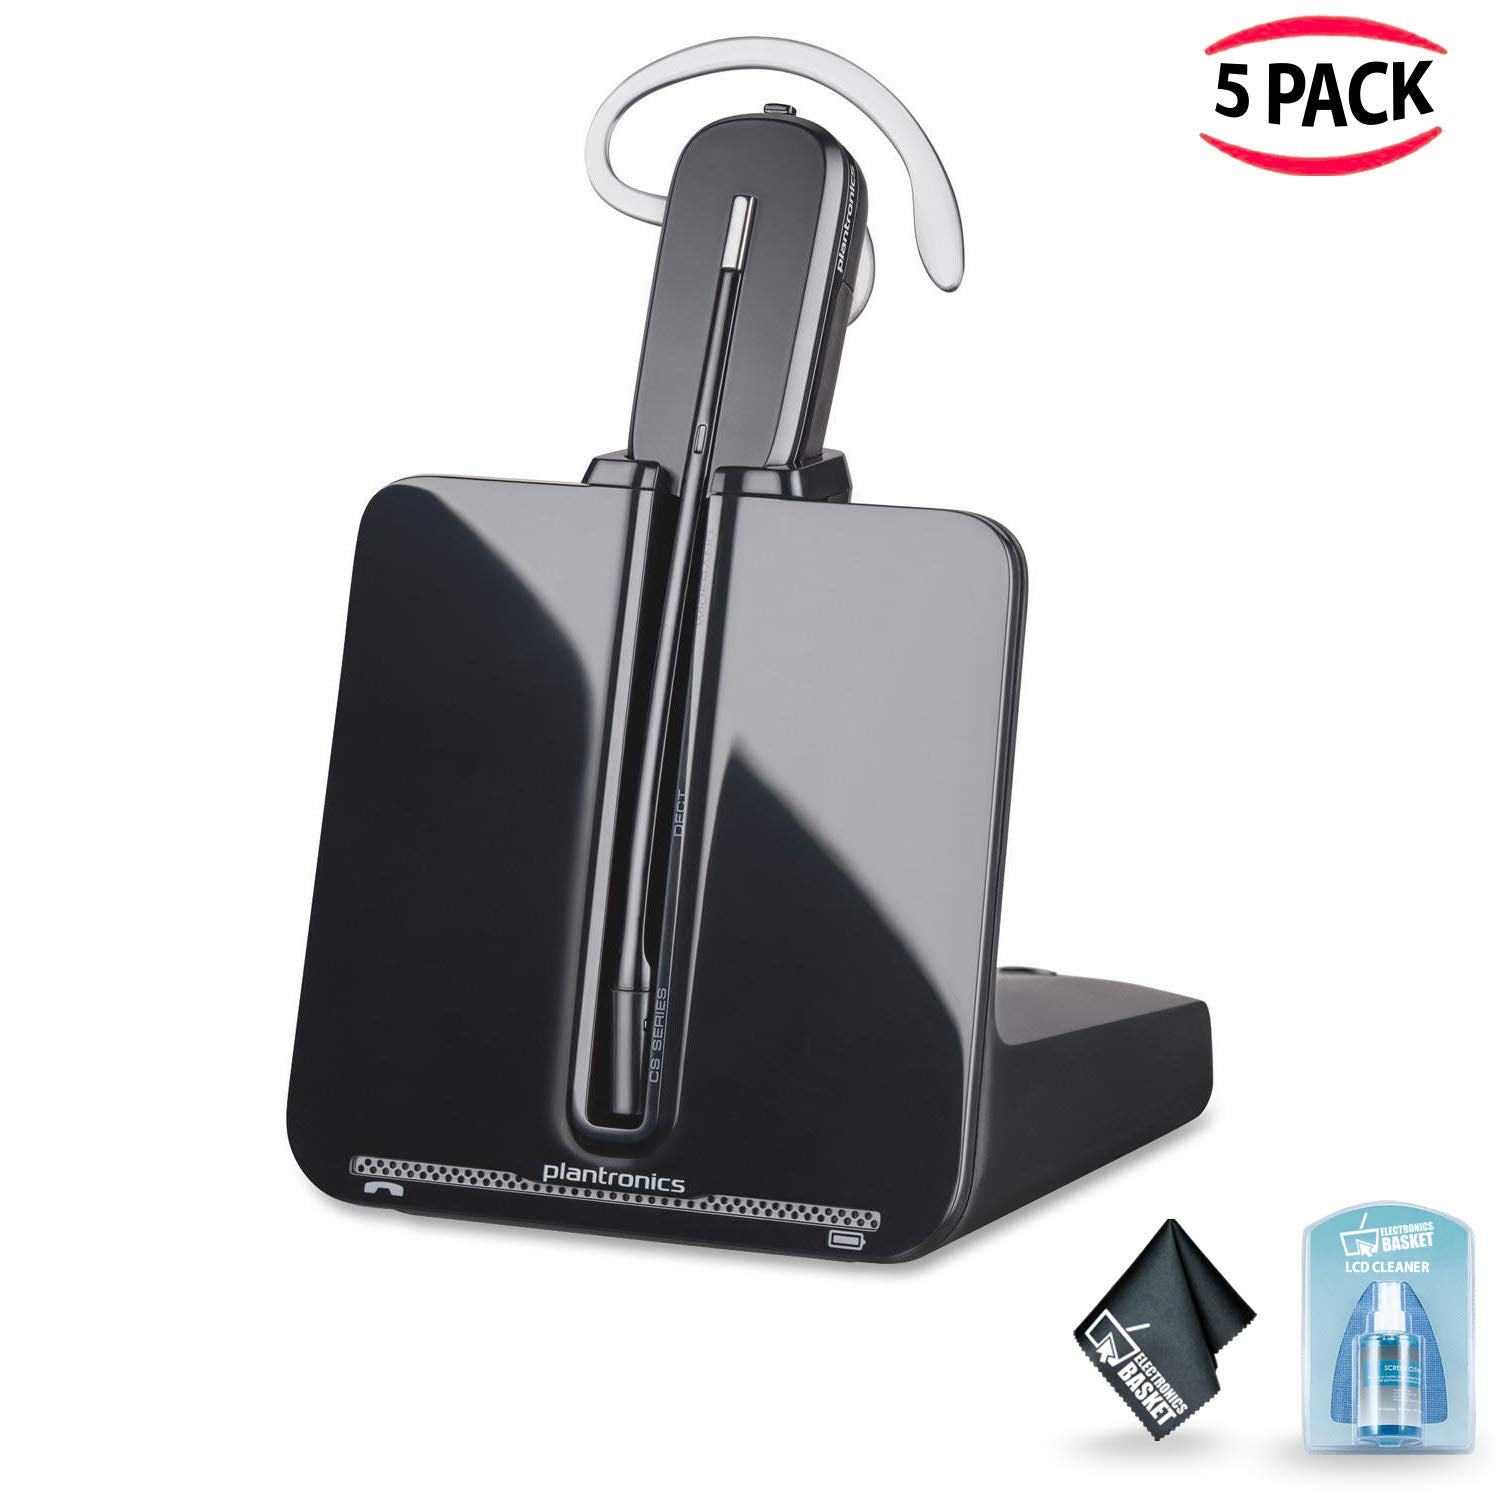 Plantronics CS540 Wireless Headset with HL10 Handset Lifter with Accessories Small Office Saver Combo (5 Count)